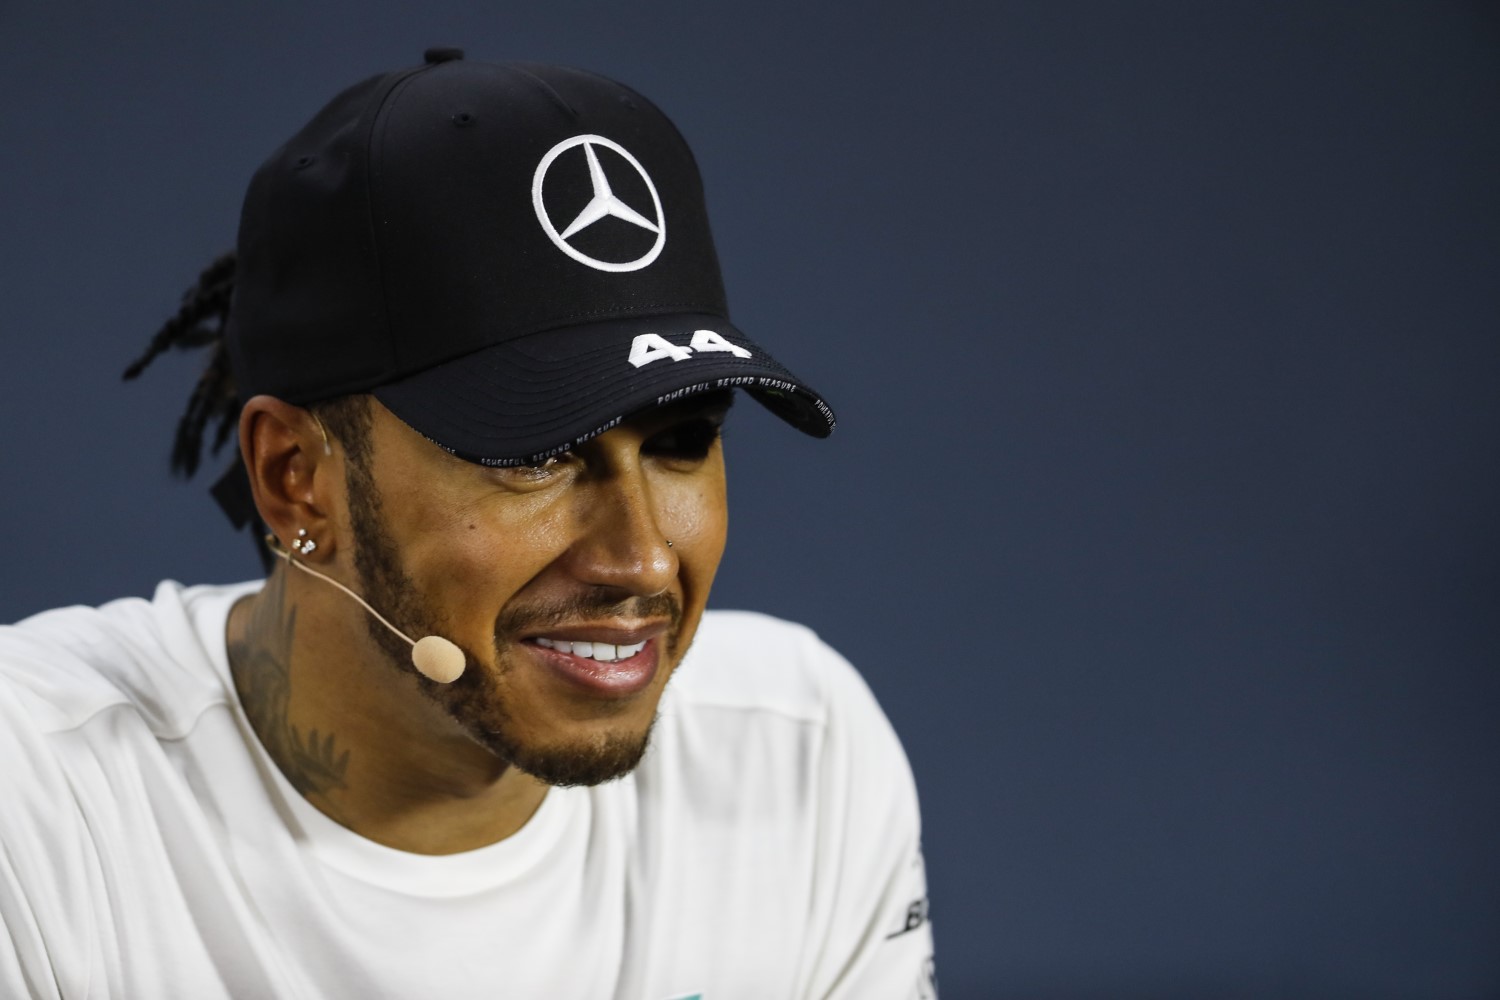 Hamilton knows he has the car to win on Sunday